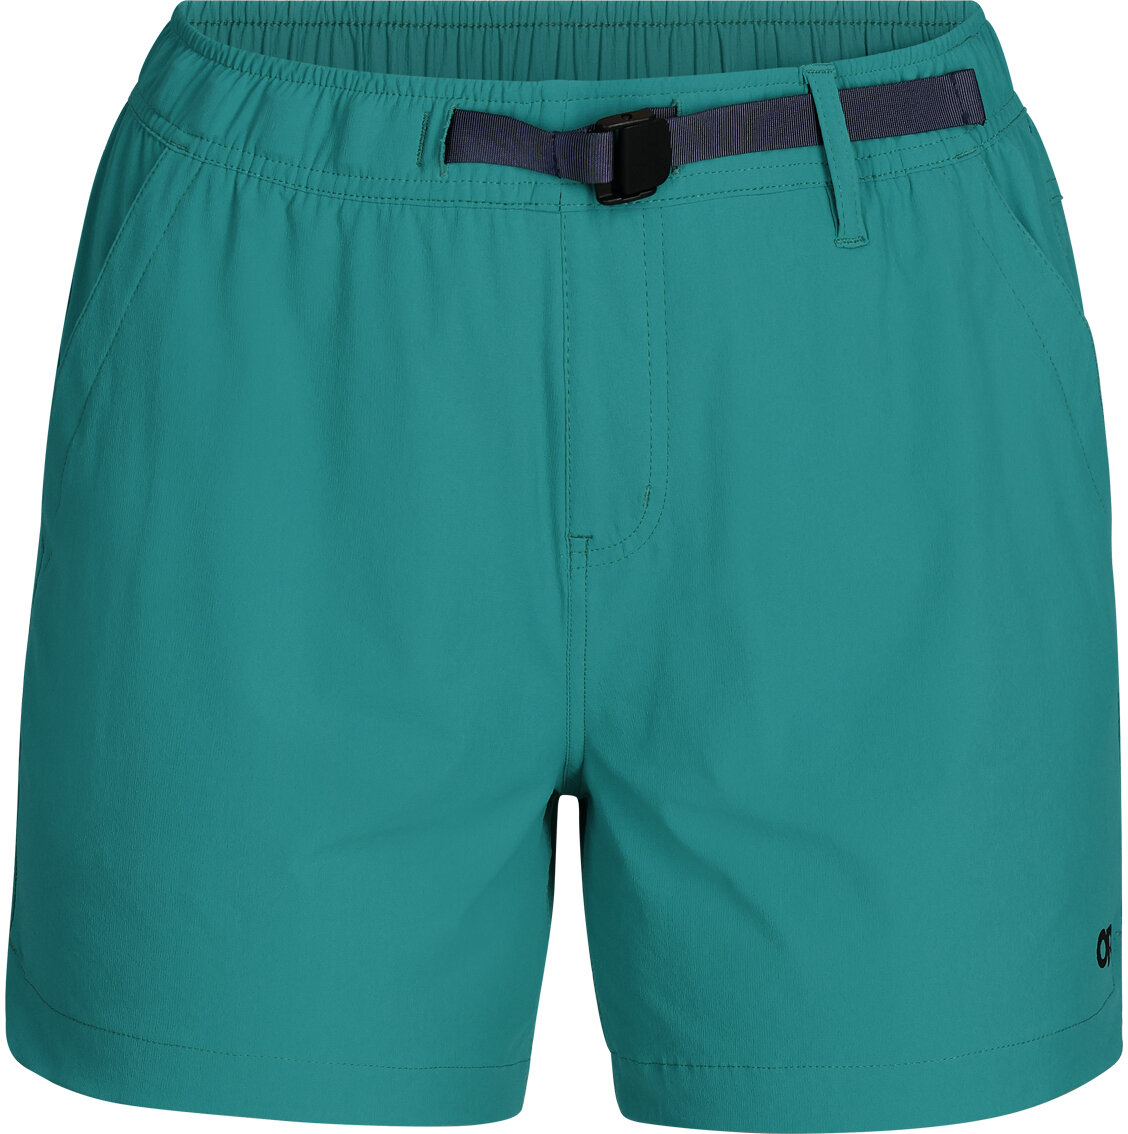 Outdoor Research Ferrosi Shorts - 5